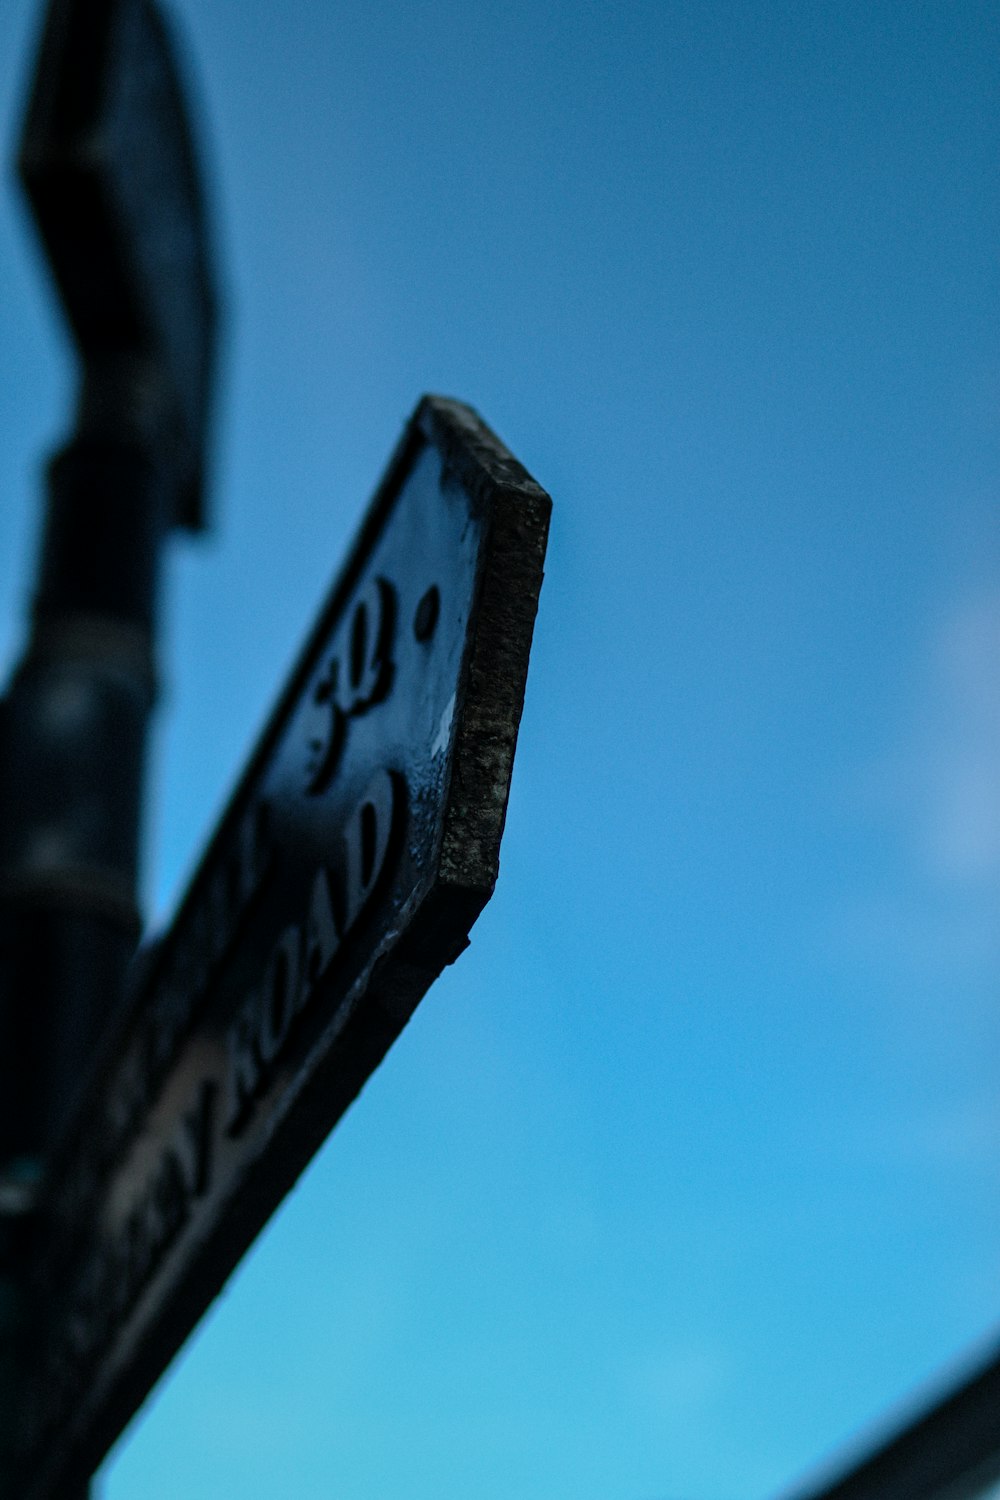 a close up of a street sign with a sky background